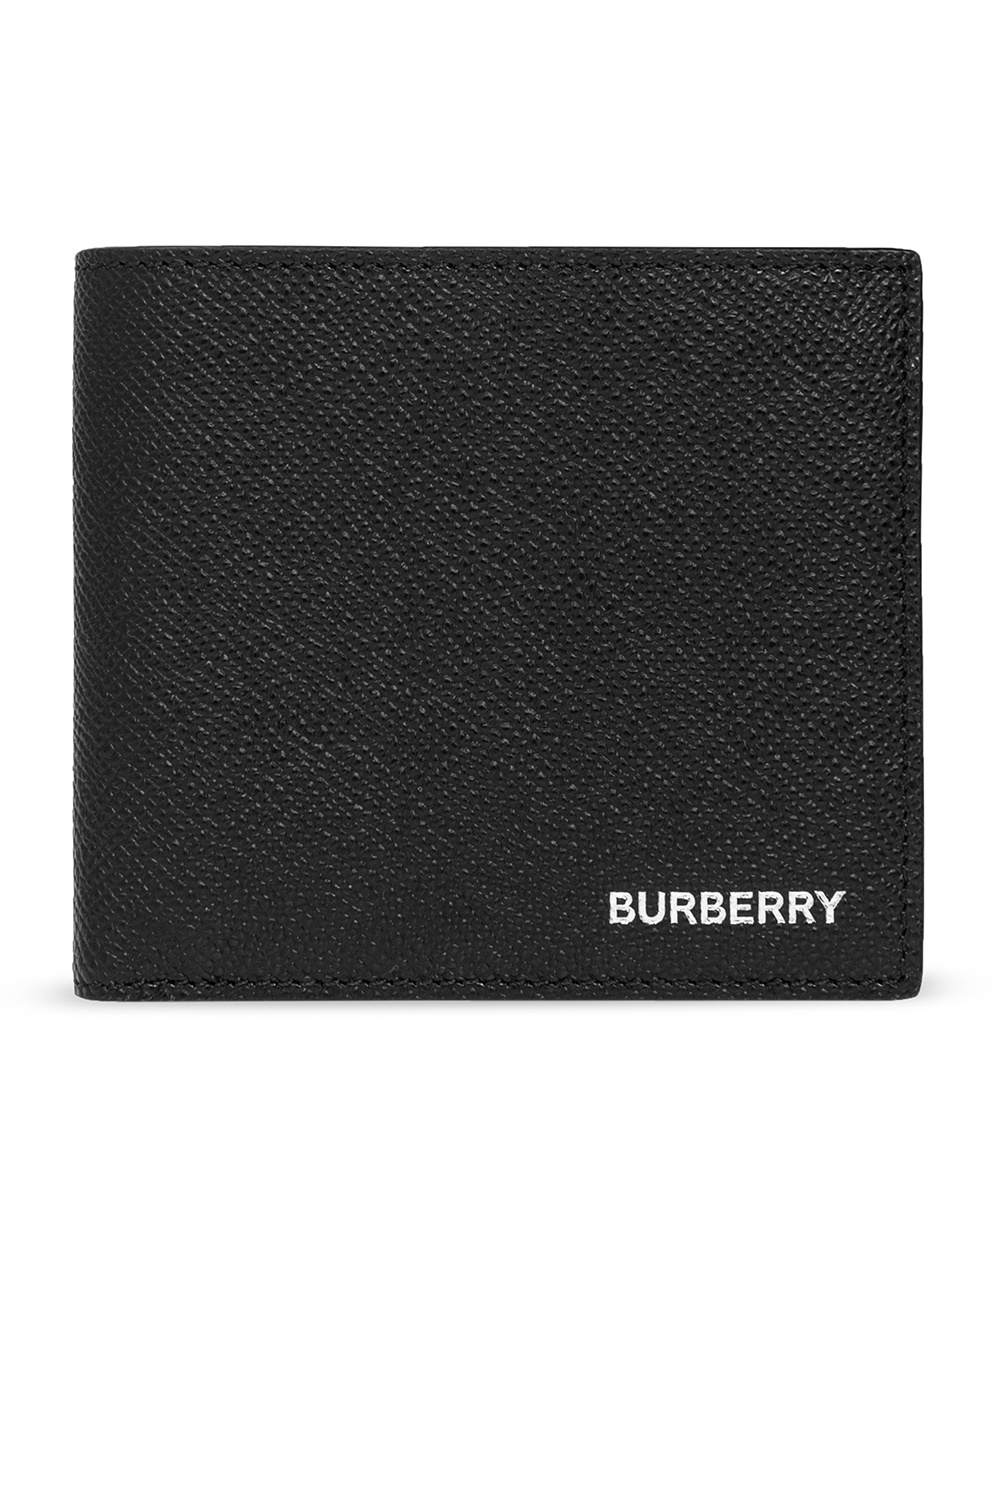 Burberry Leather bifold wallet